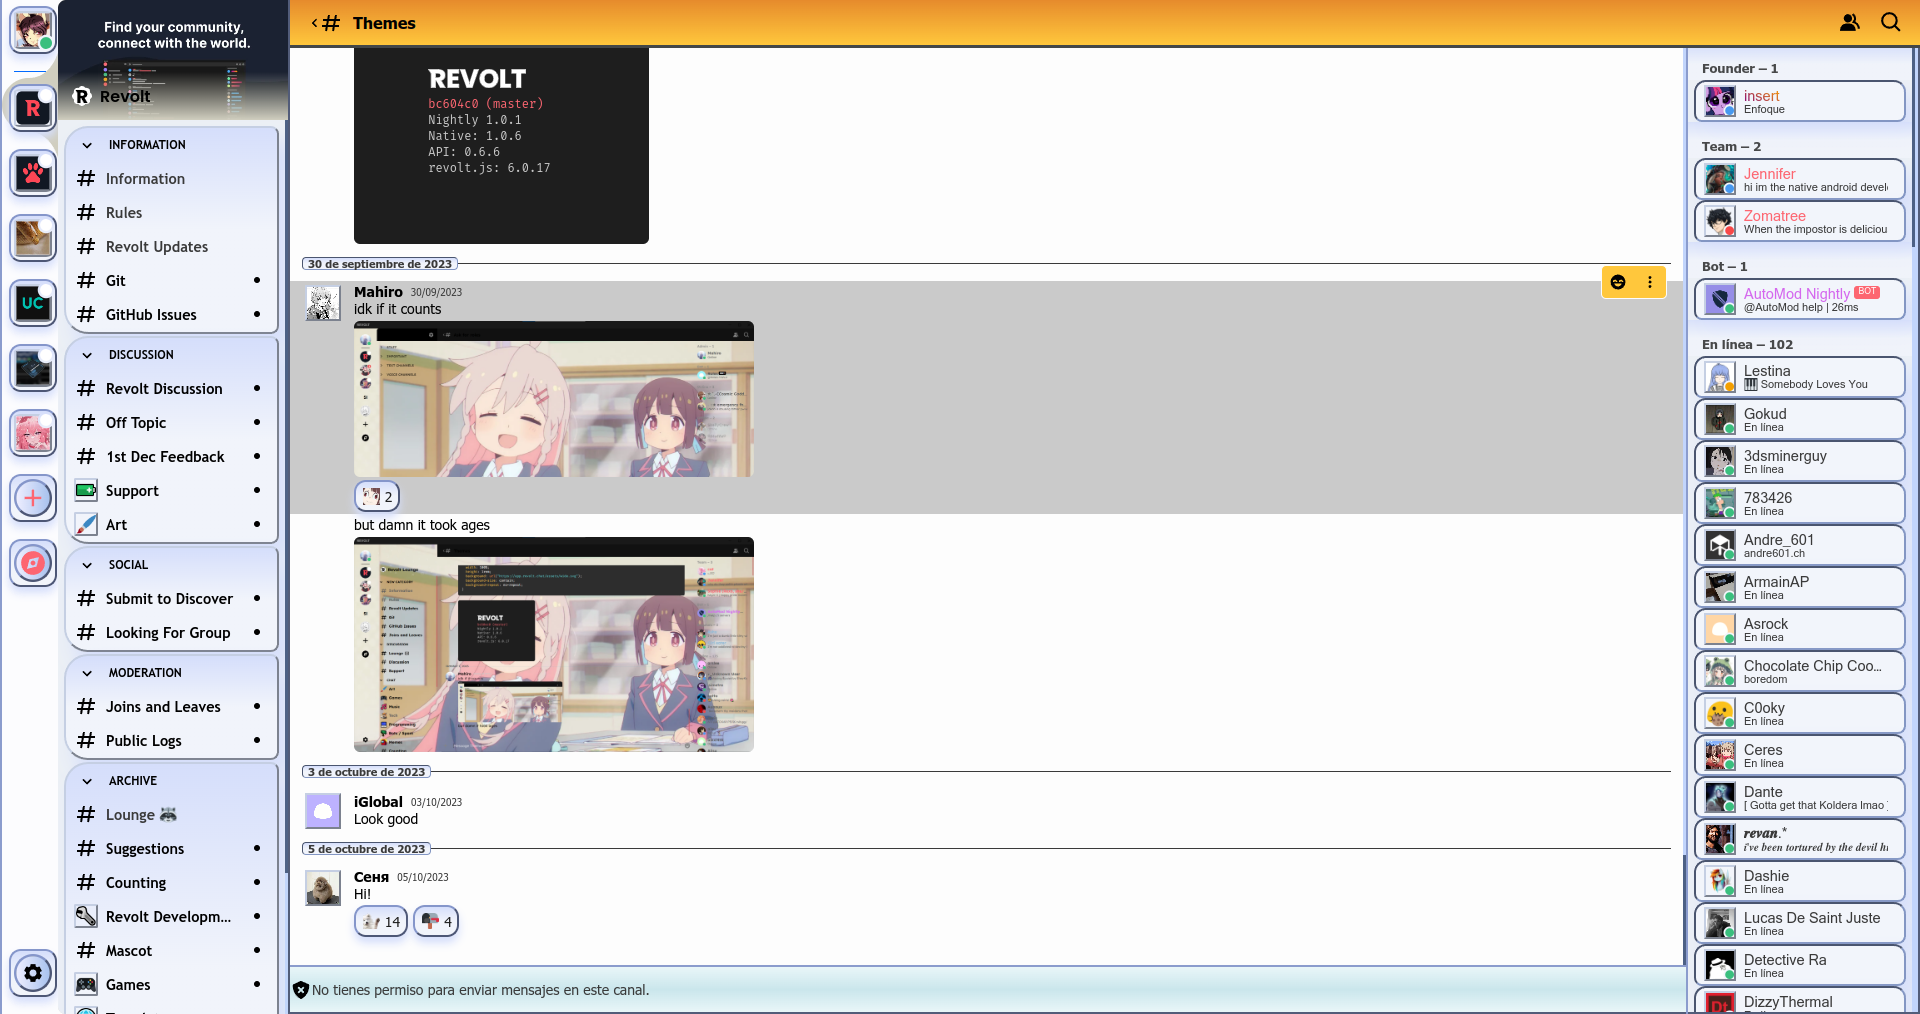 Screenshot of this very theme in action, on the official Revolt server